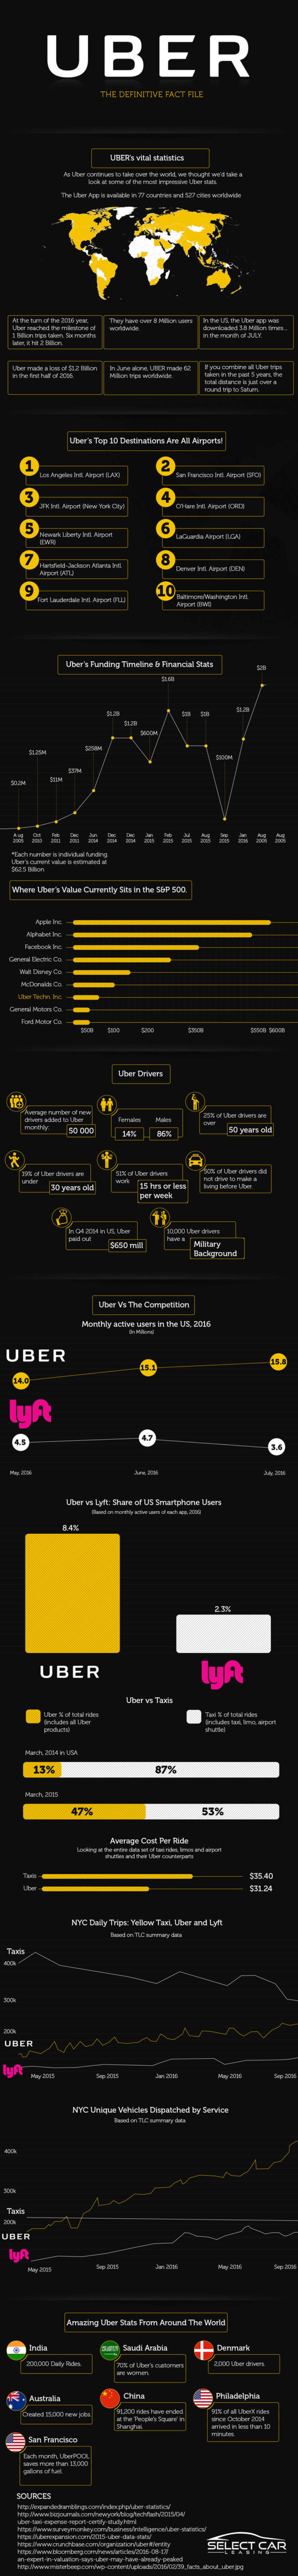 Uber- the Definitive Fact File